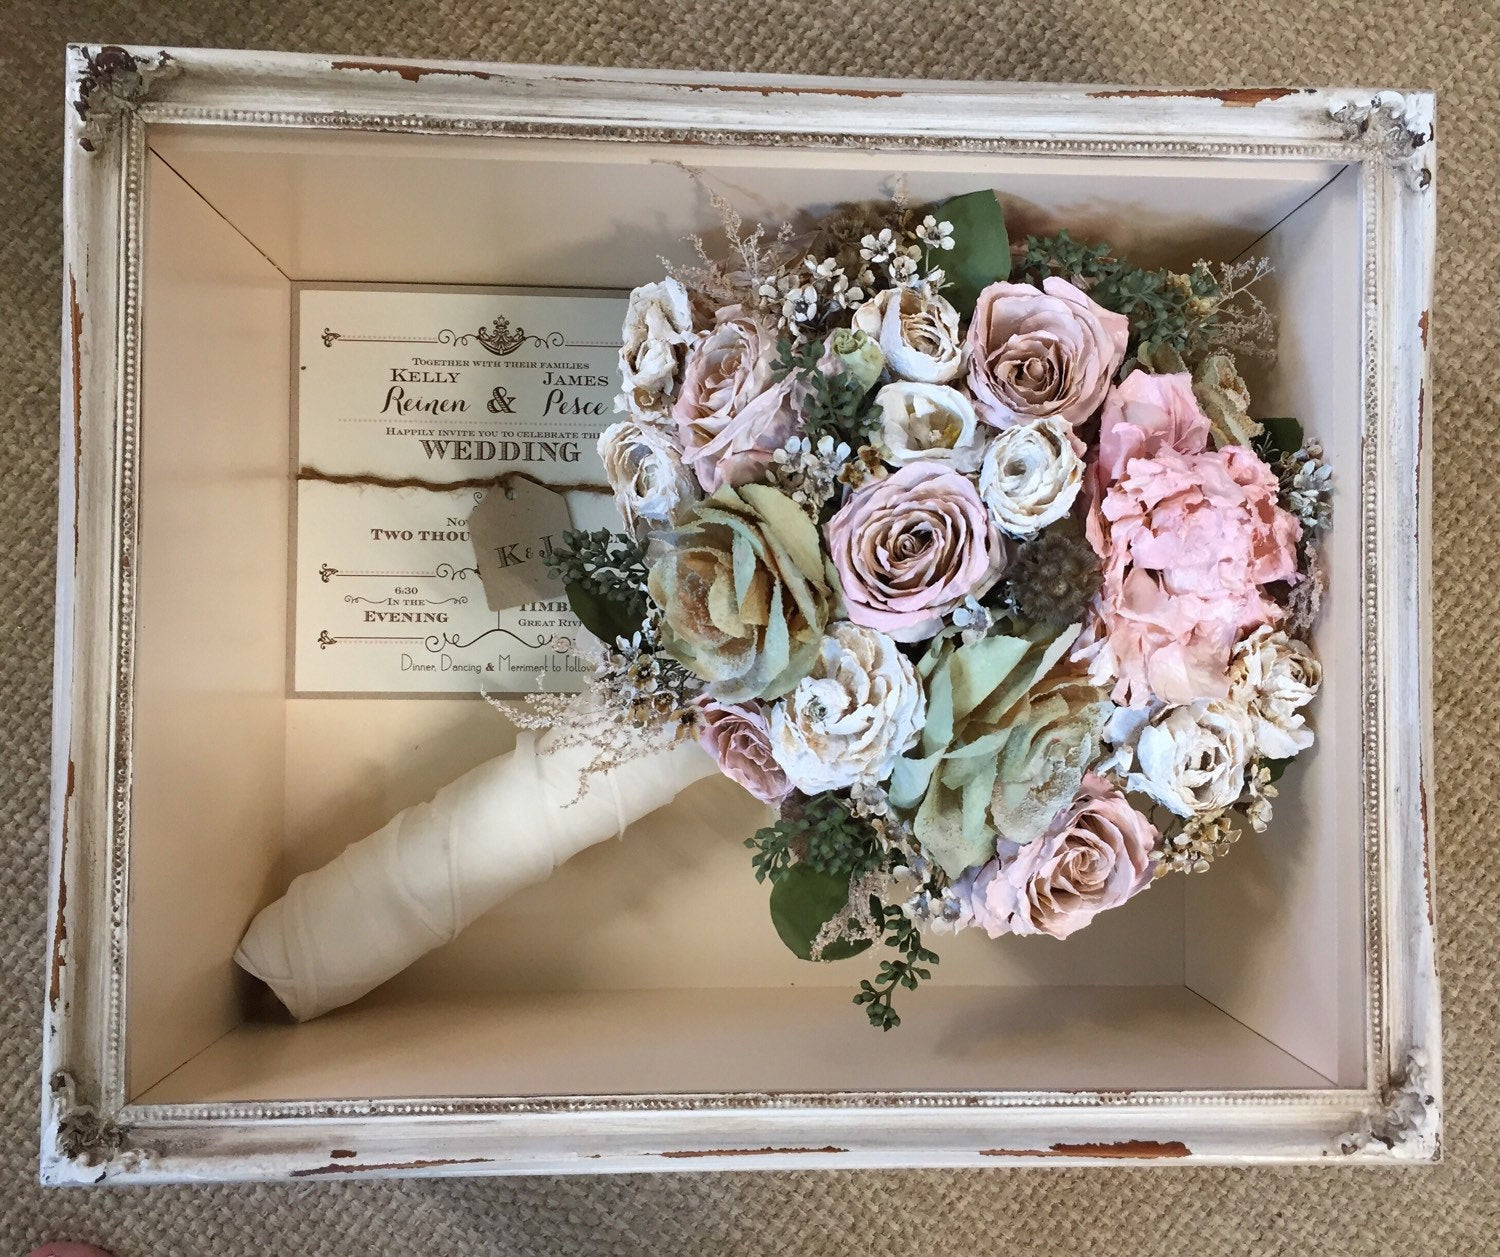 How To Preserve Wedding Flowers
 Floral Preservation for Wedding Bouquets in Shadow Box Local